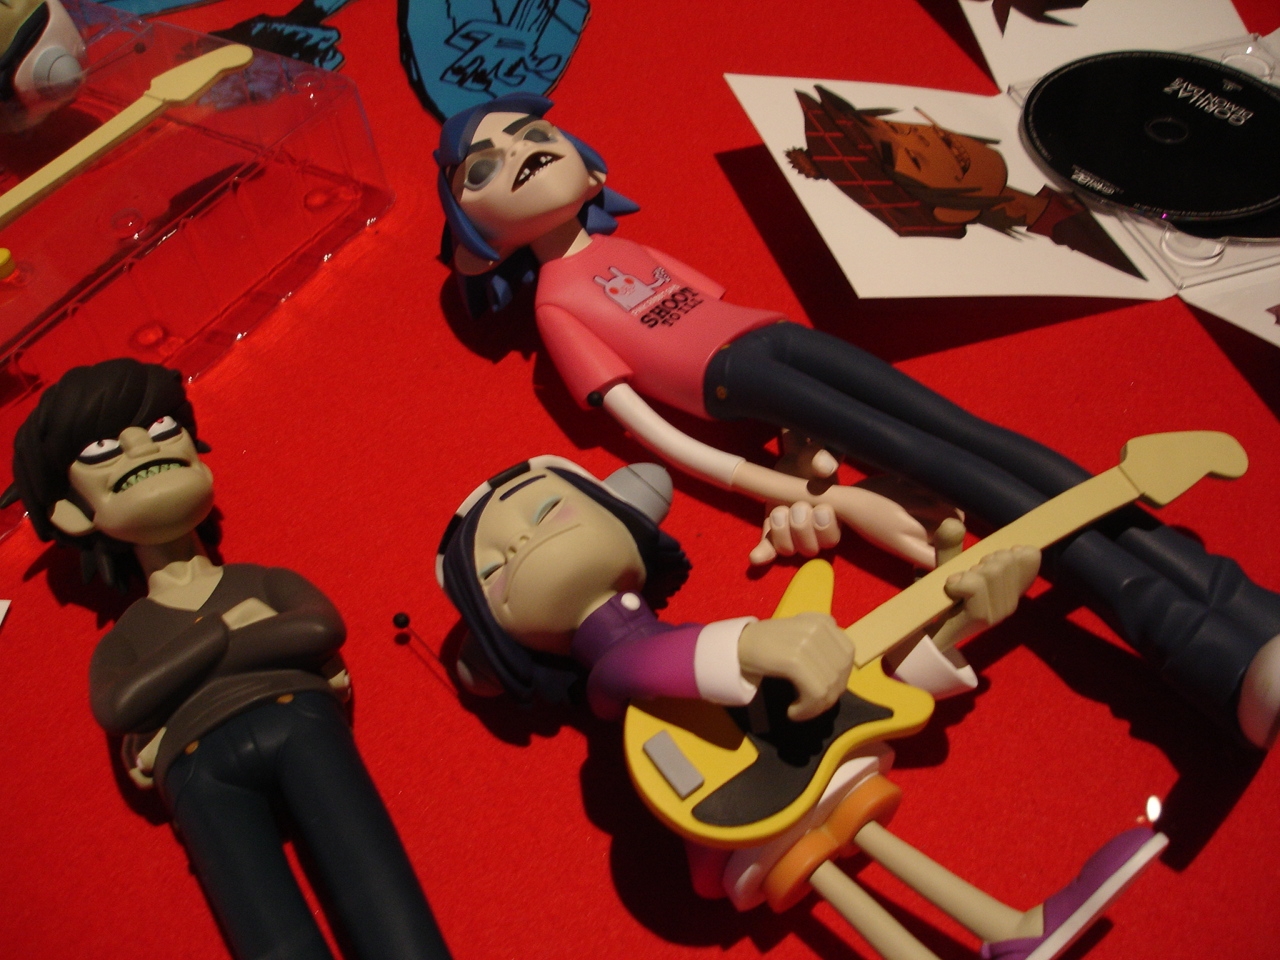 Gorillaz at 20: The Story of the Virtual Band’s Debut